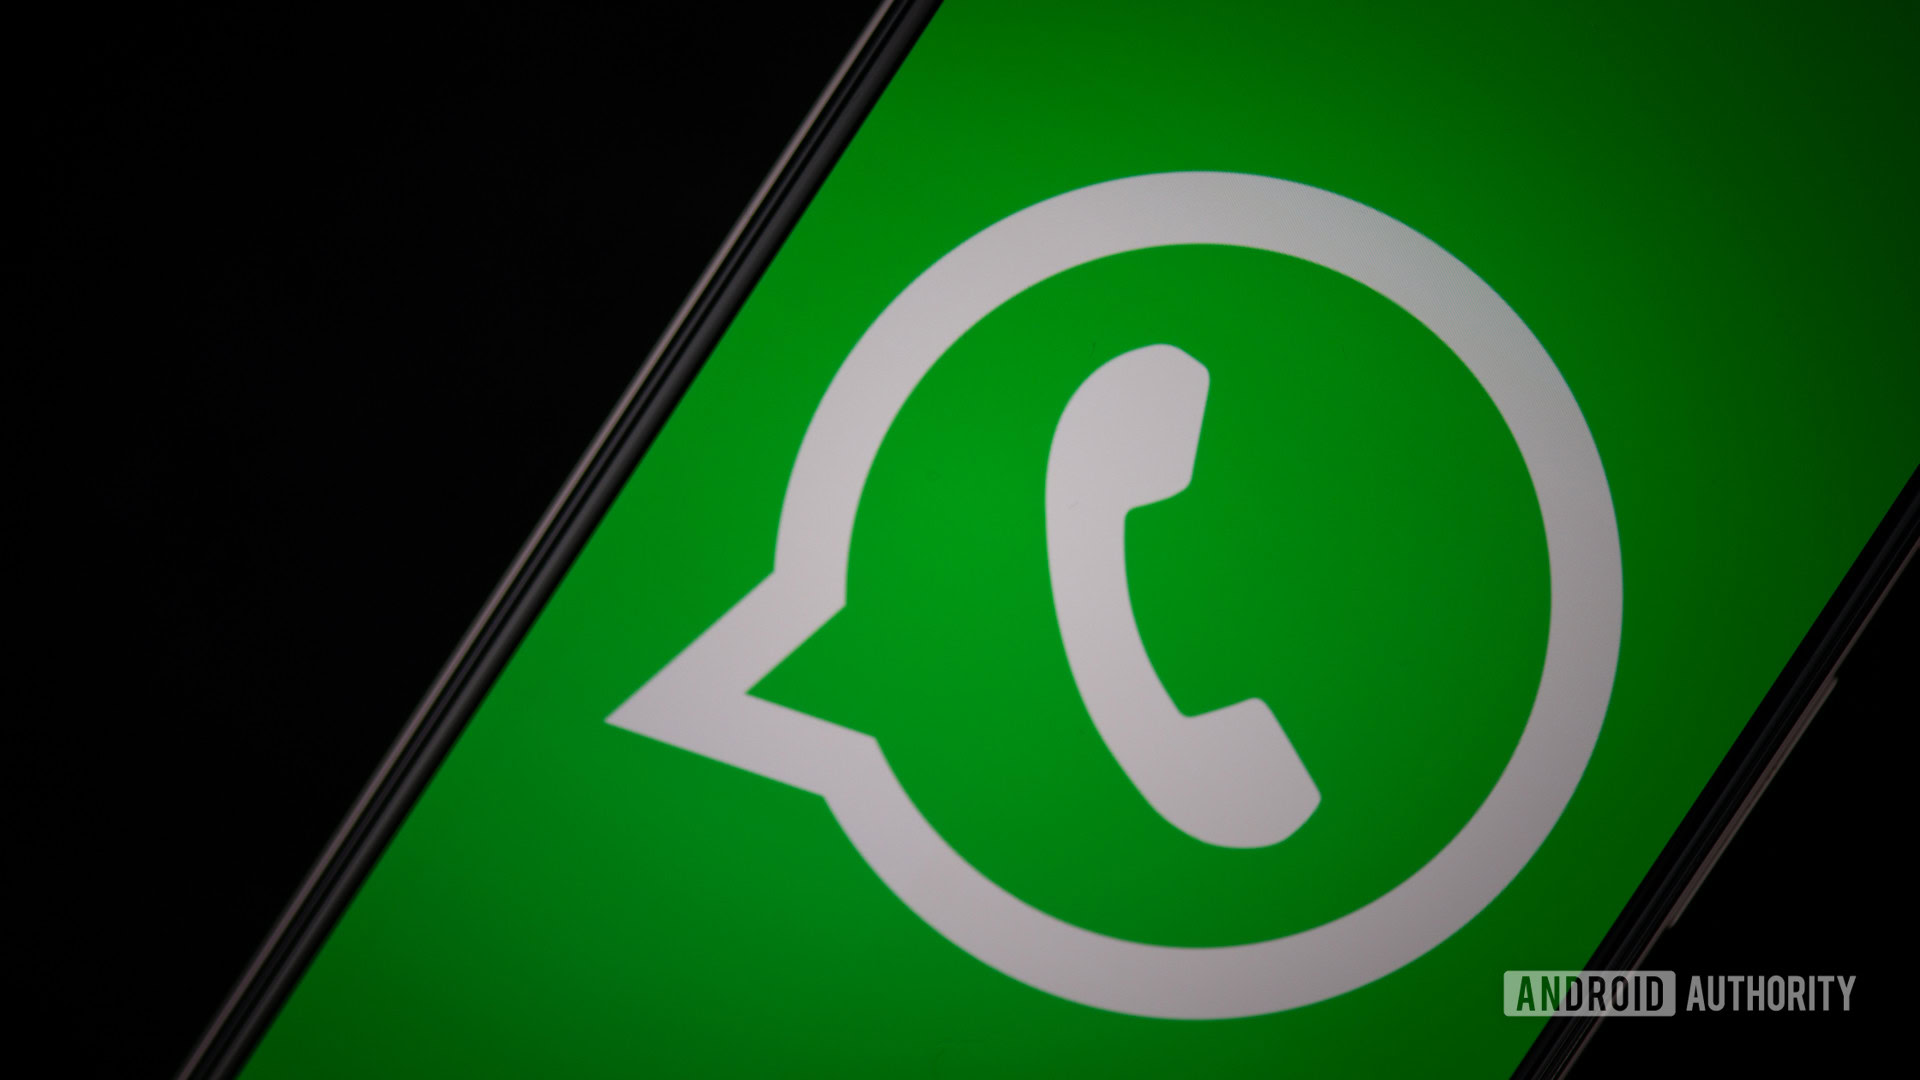 WhatsApp trick: How to send messages in blue colour and fancy